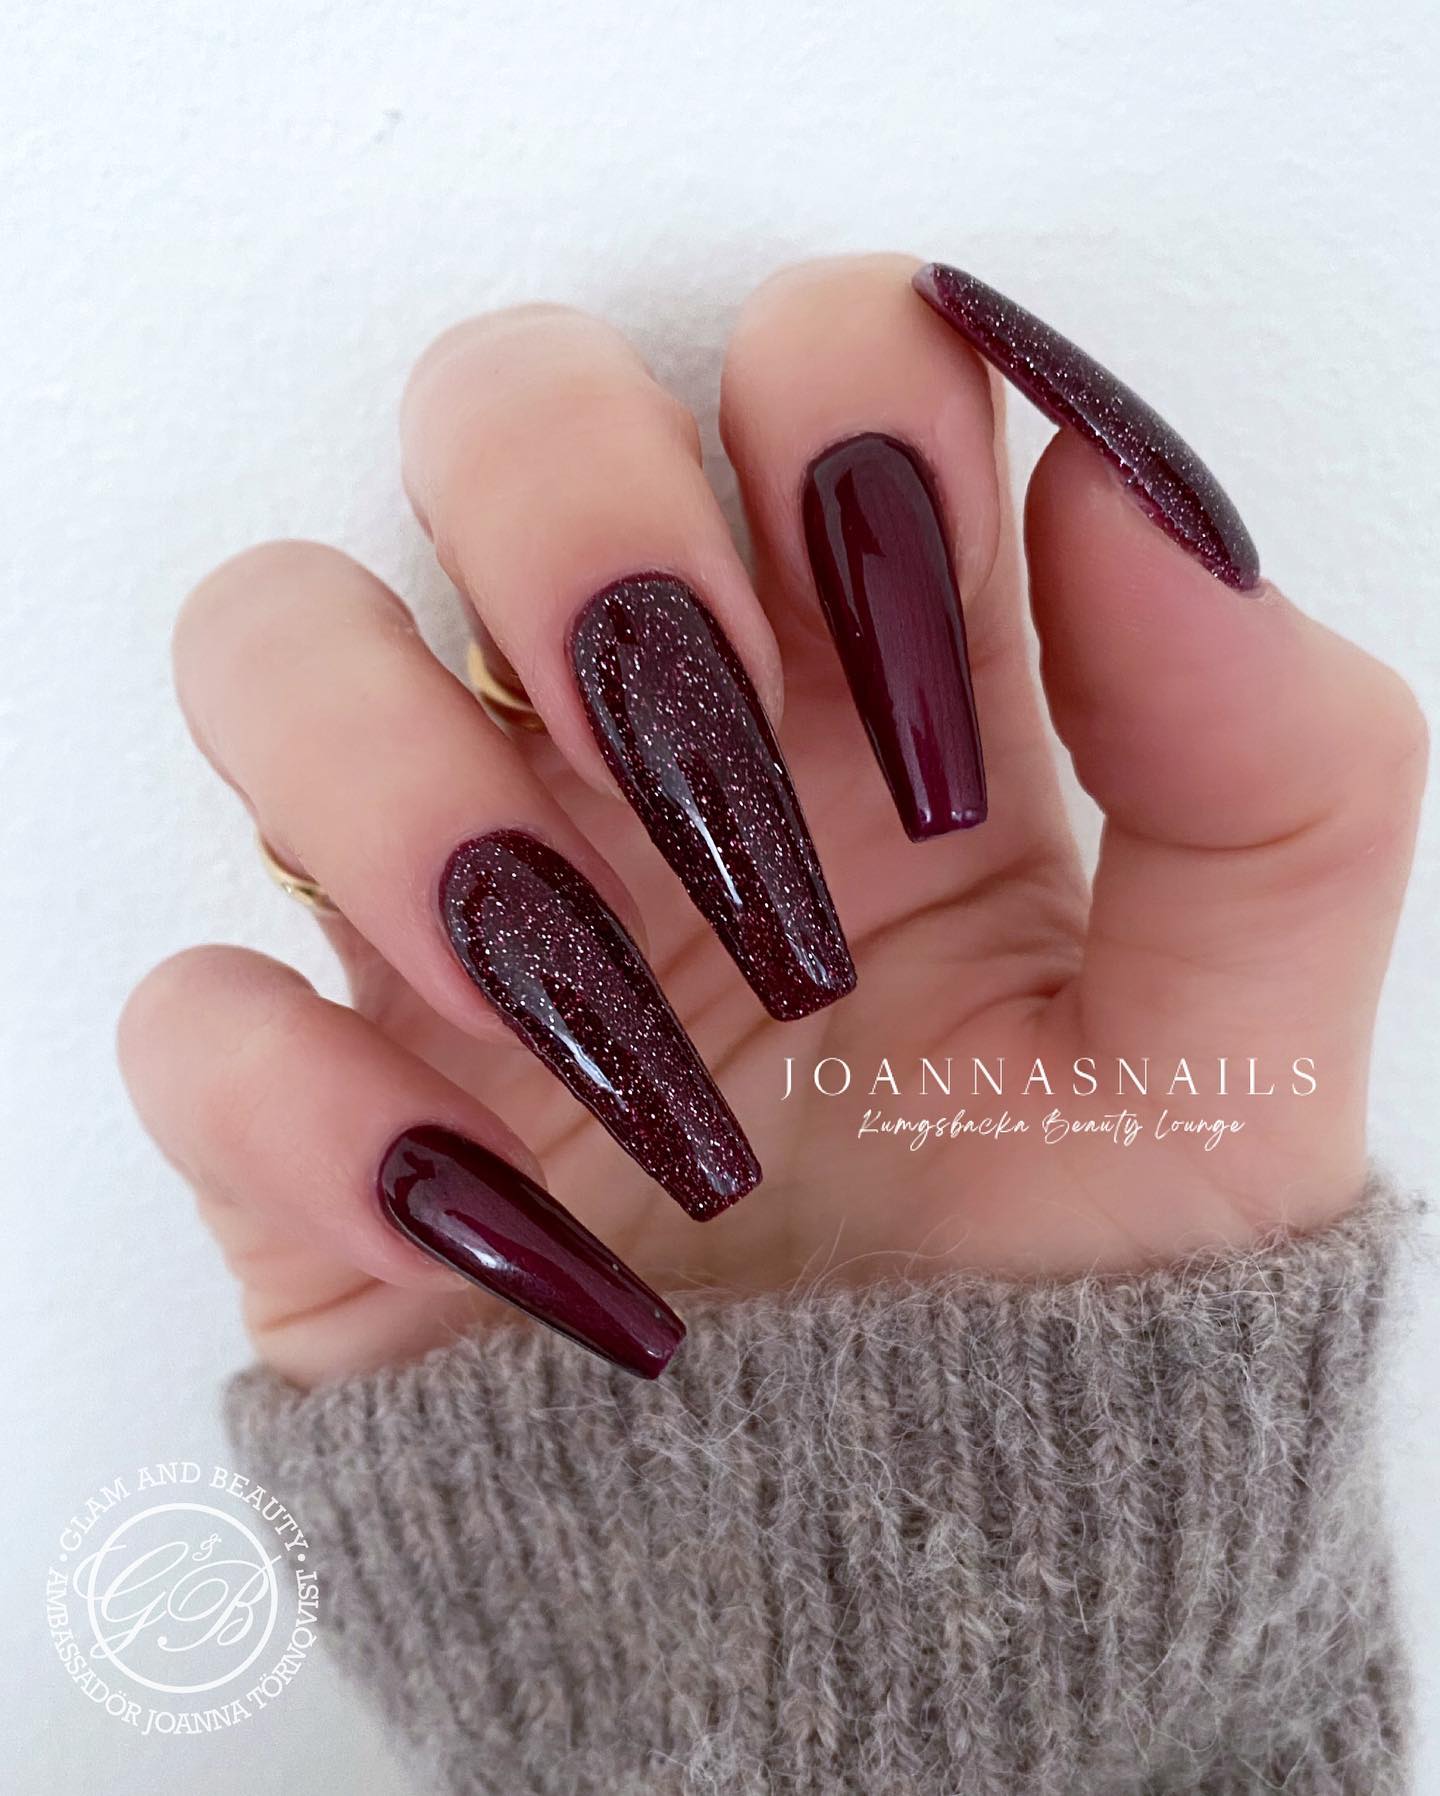 Long Burgundy Nails with Glitter